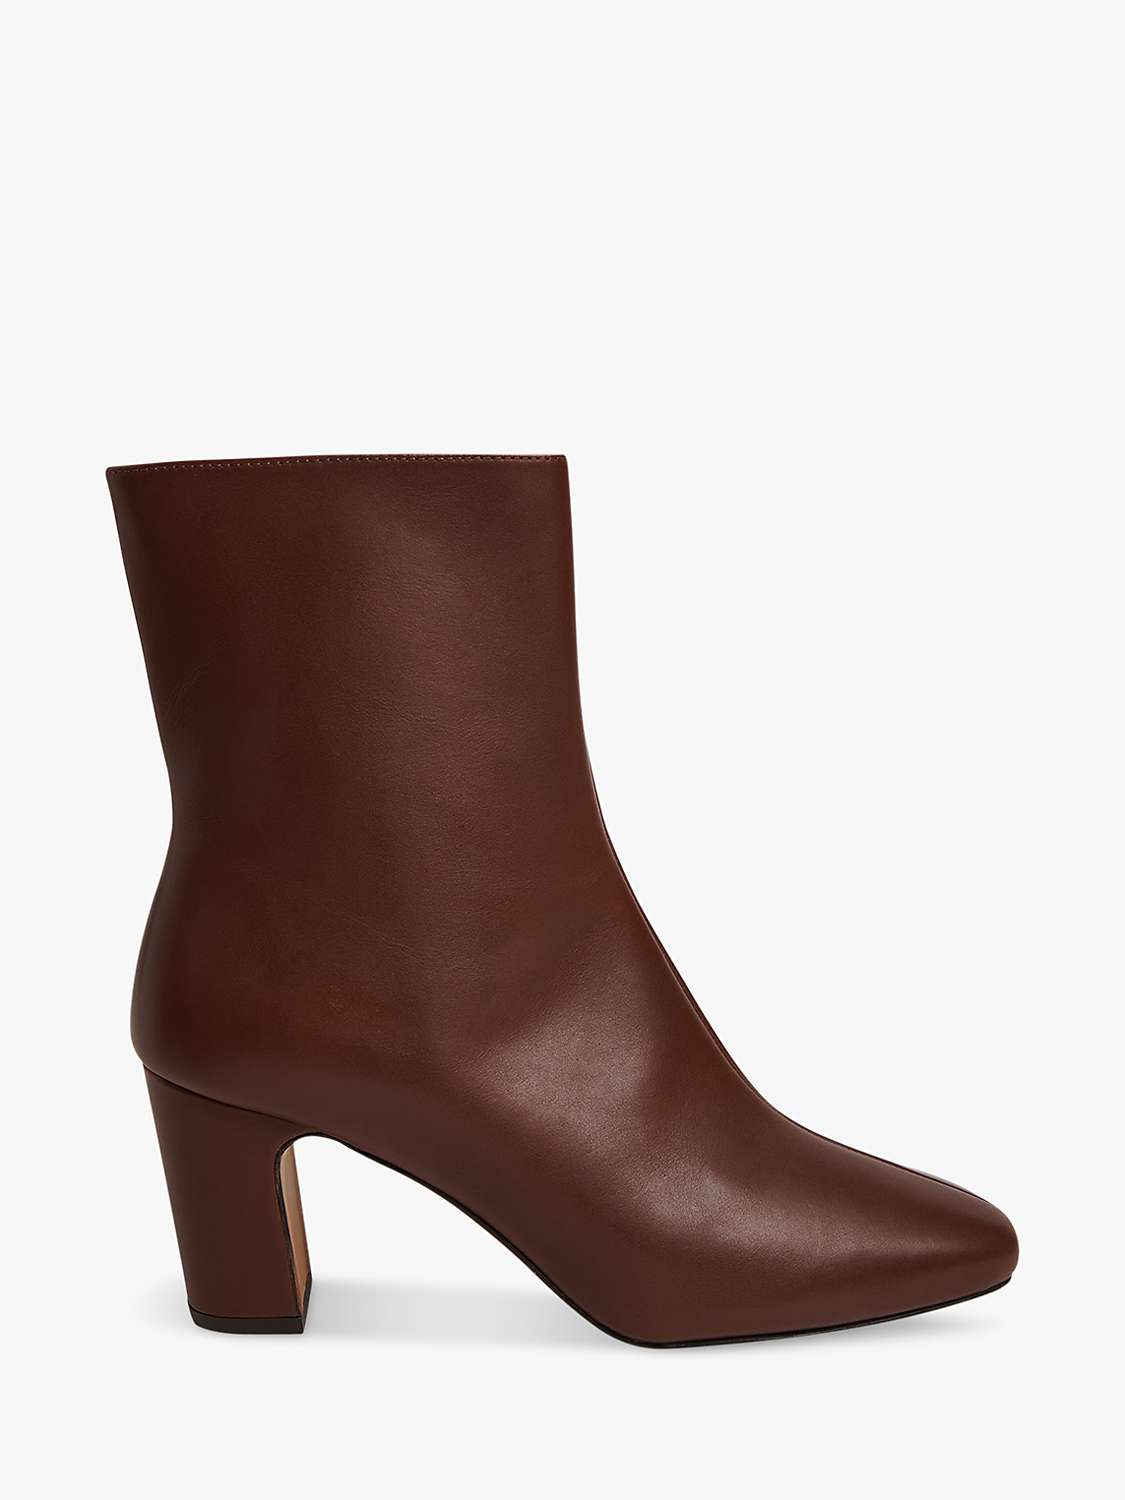 Buy Whistles Holan Leather Block Heel Ankle Boots Online at johnlewis.com